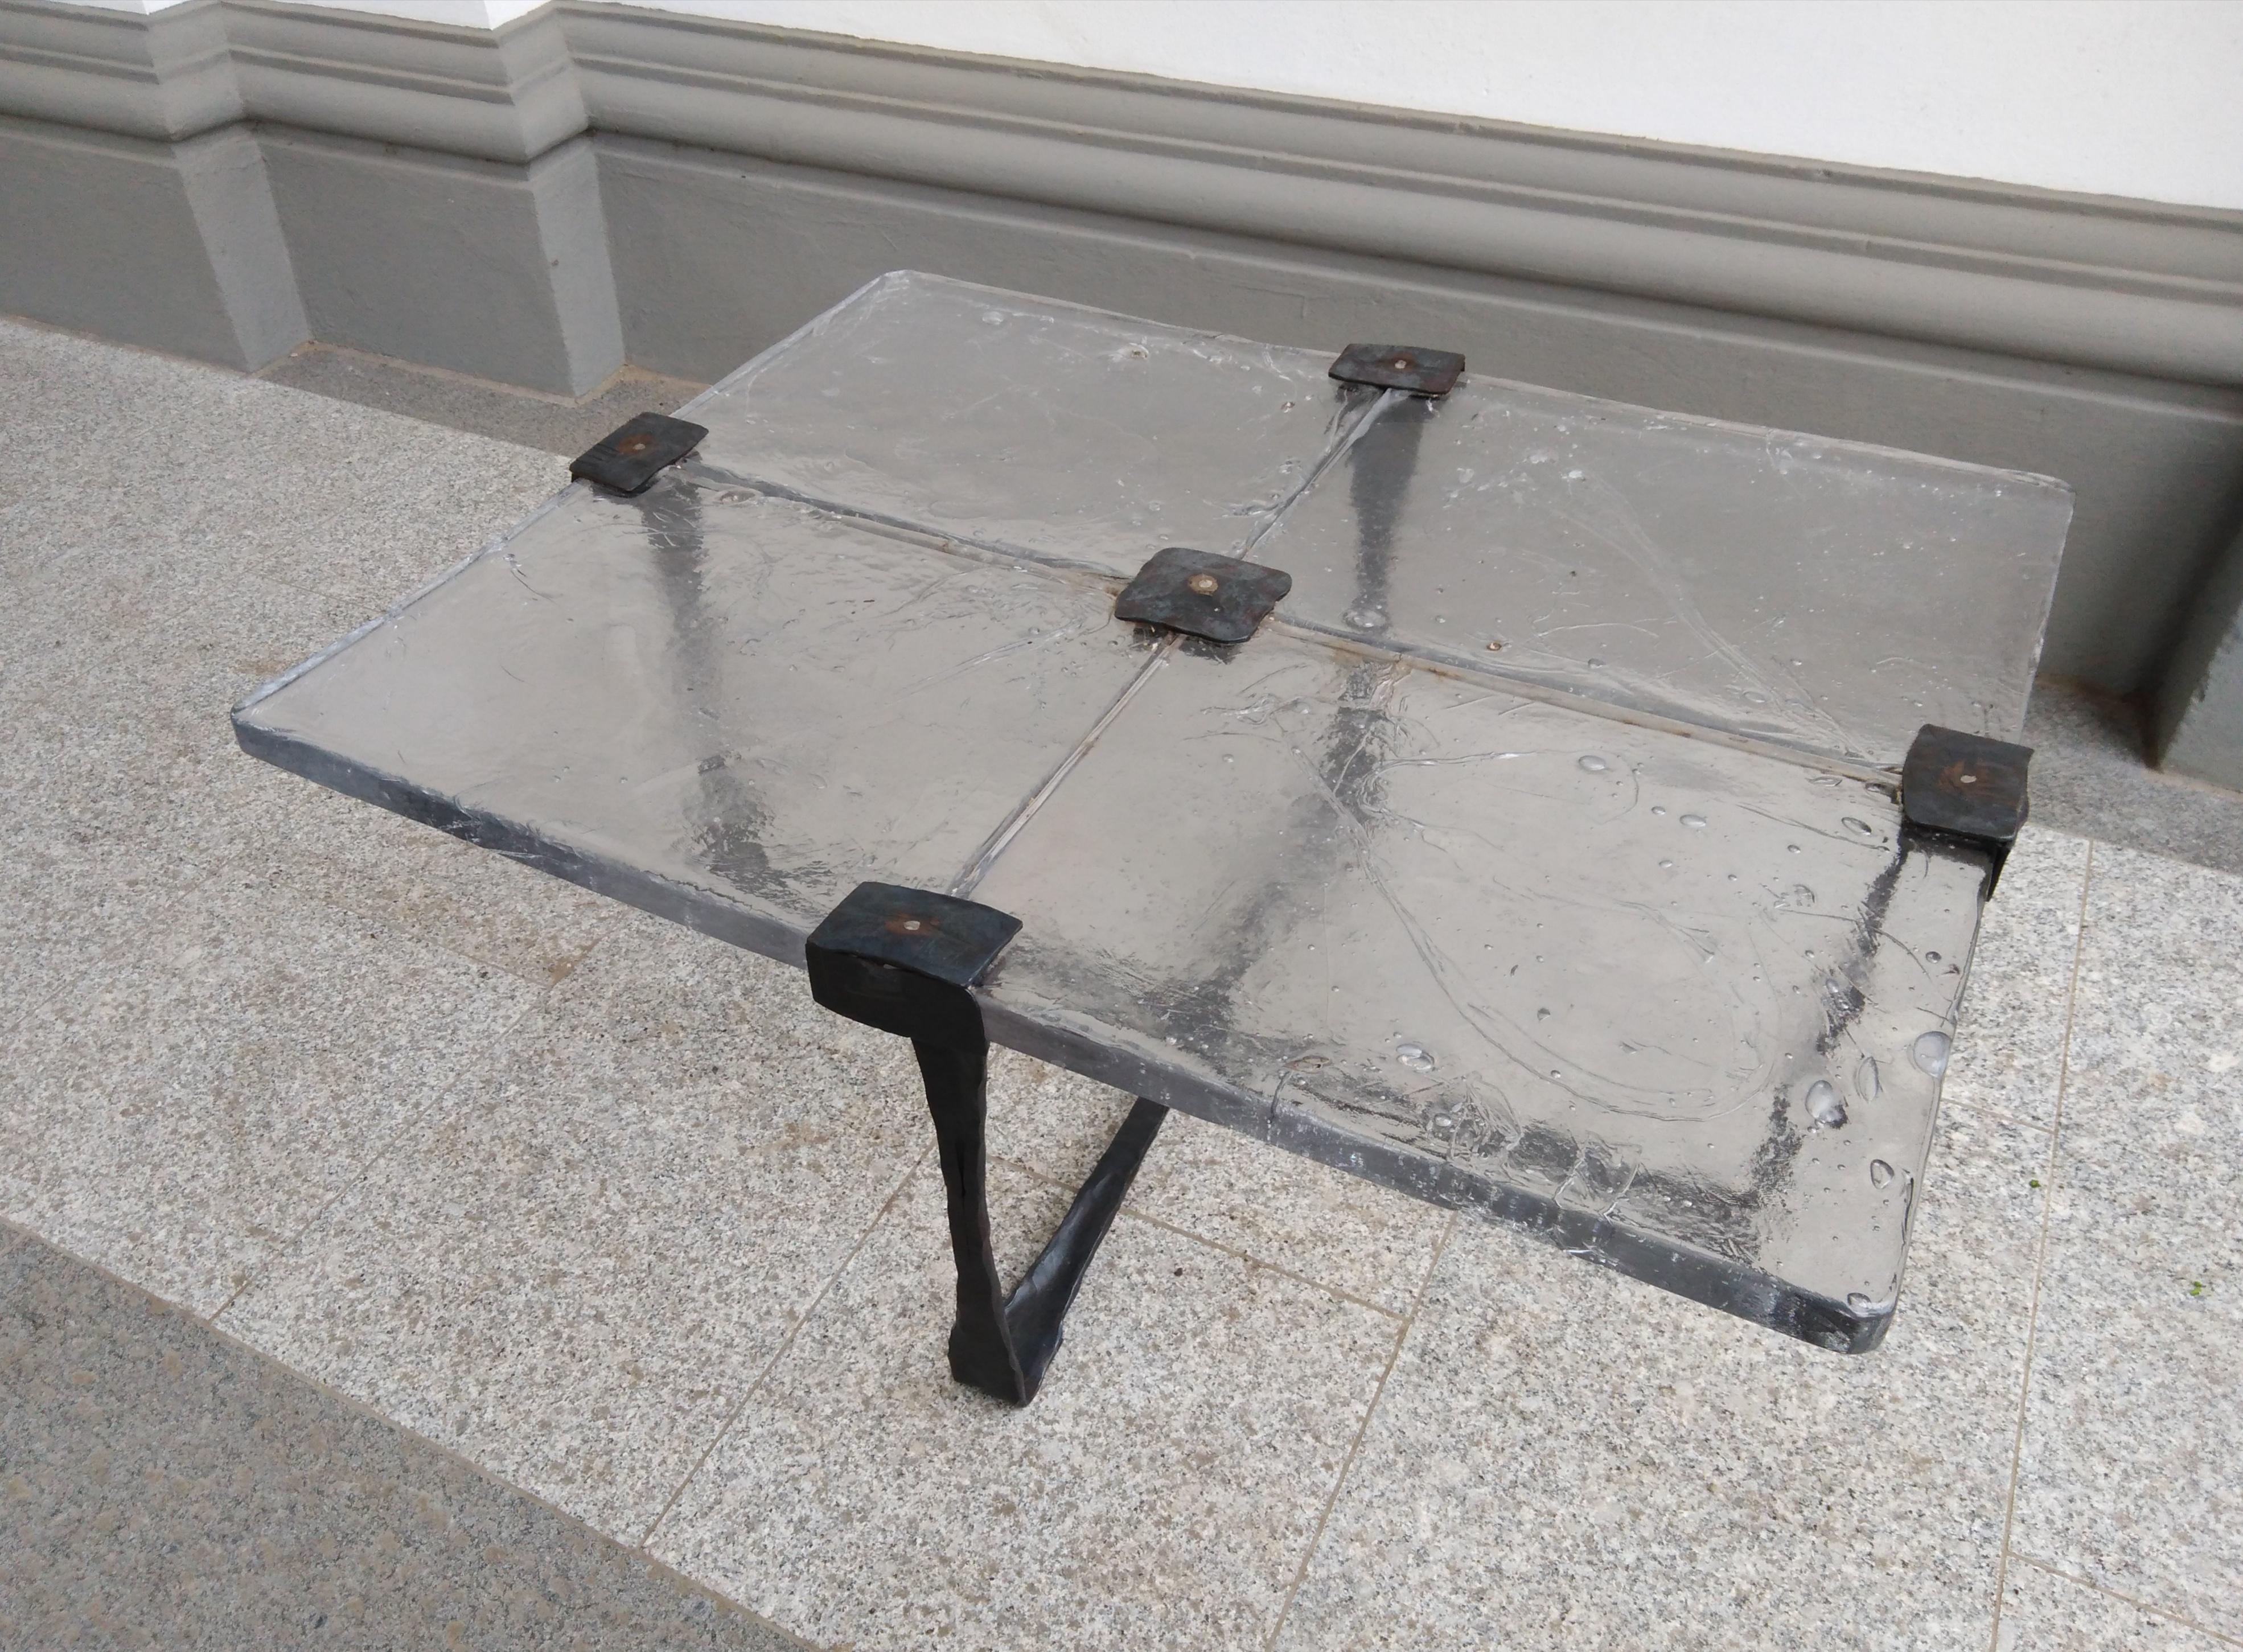 Rare couchtable in glass and metal by Lothar Klute from the 80s

We'll disamble the table for the transport : ) and will packed the glass pieces in seperate boxes.